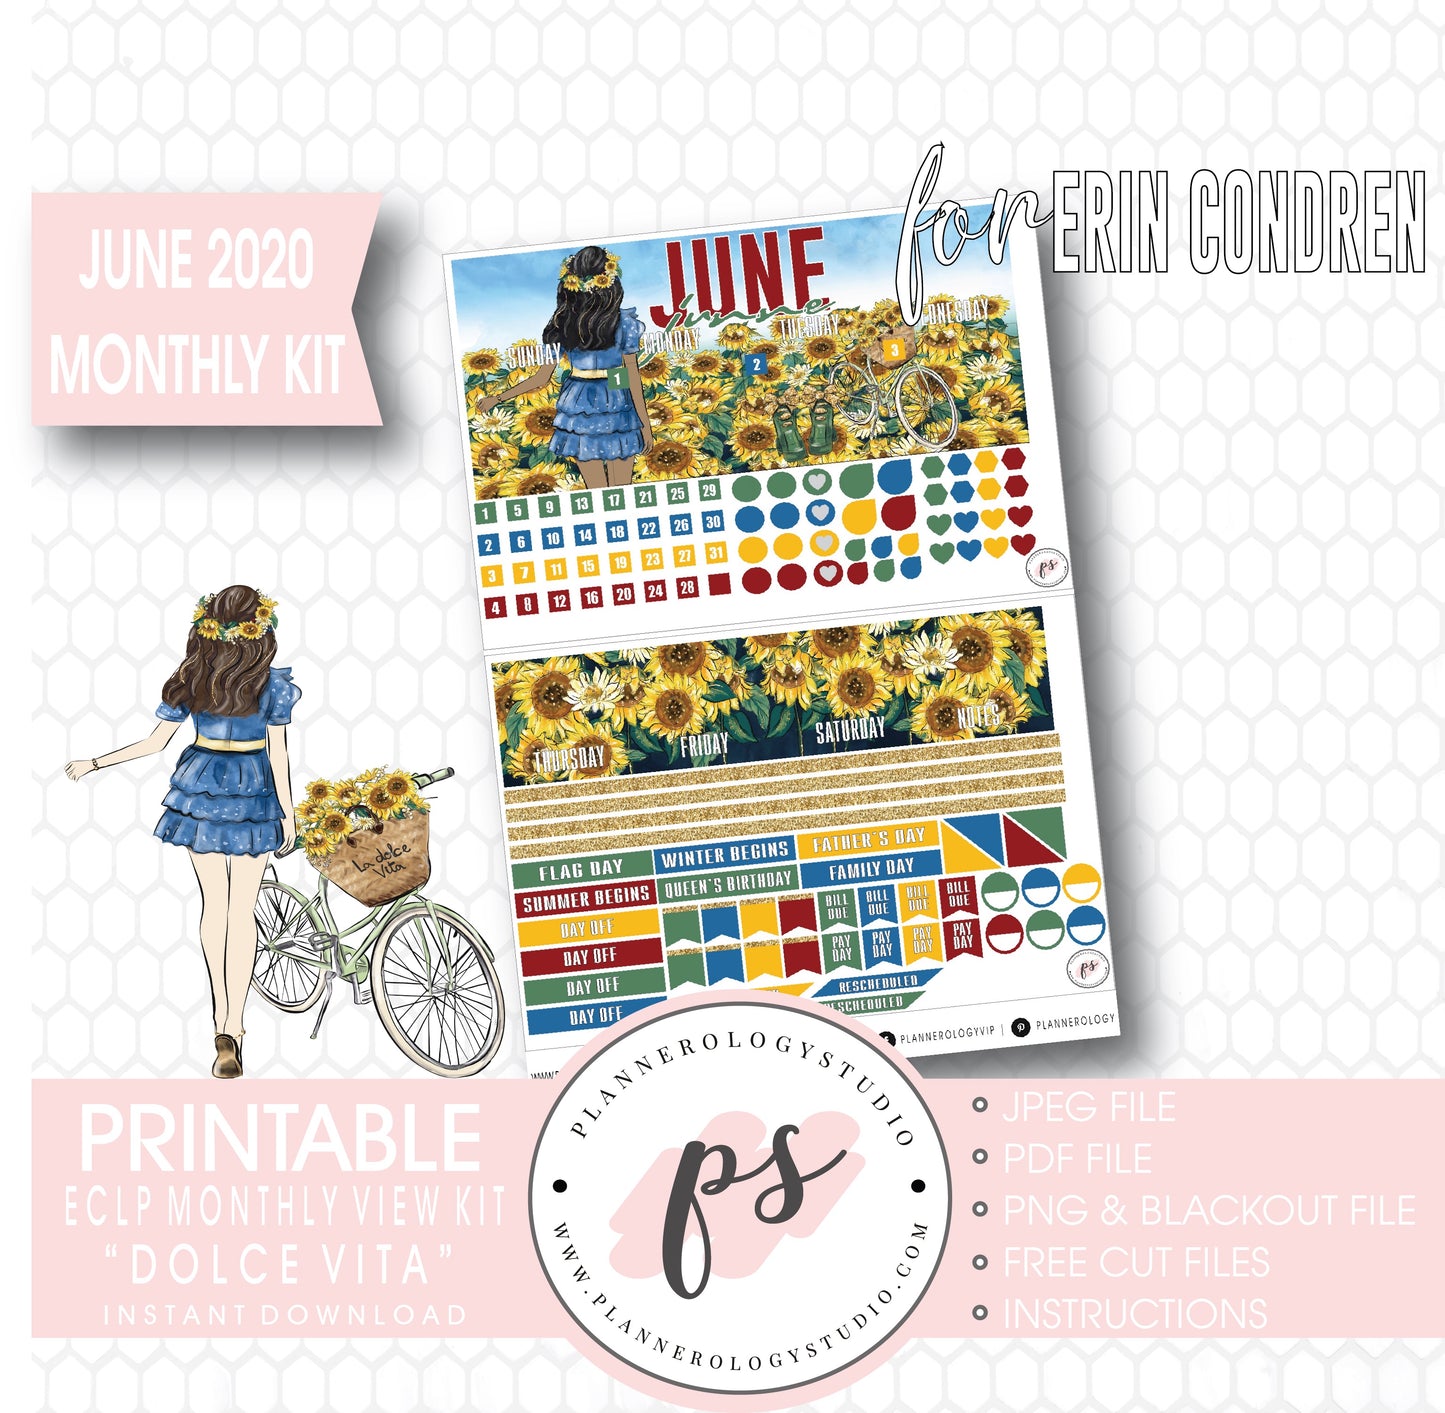 Dolce Vita June 2020 Monthly View Kit Digital Printable Planner Stickers (for use with Erin Condren) - Plannerologystudio